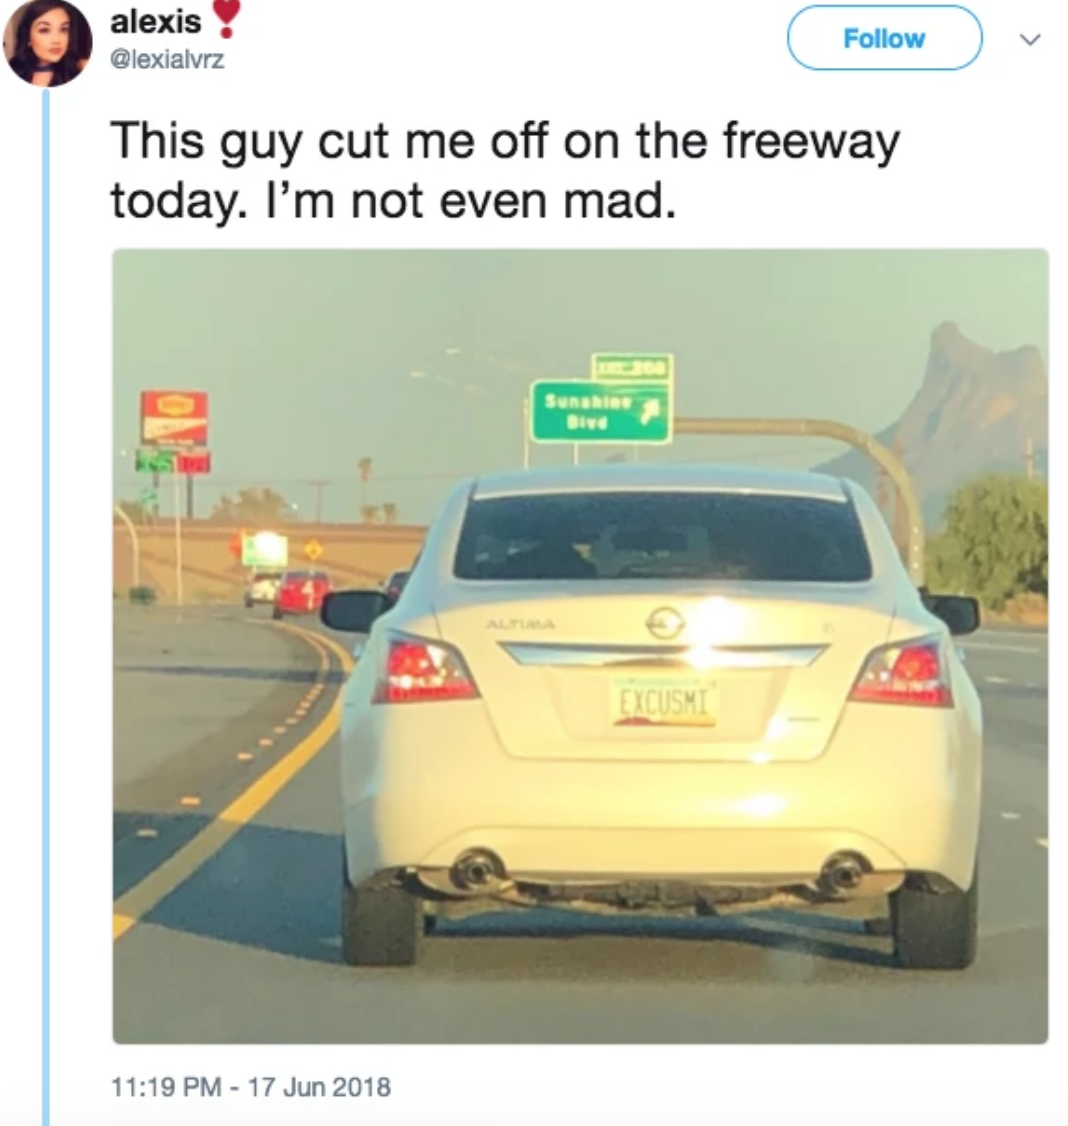 funny tweets women - alexis alexis ! This guy cut me off on the freeway today. I'm not even mad.